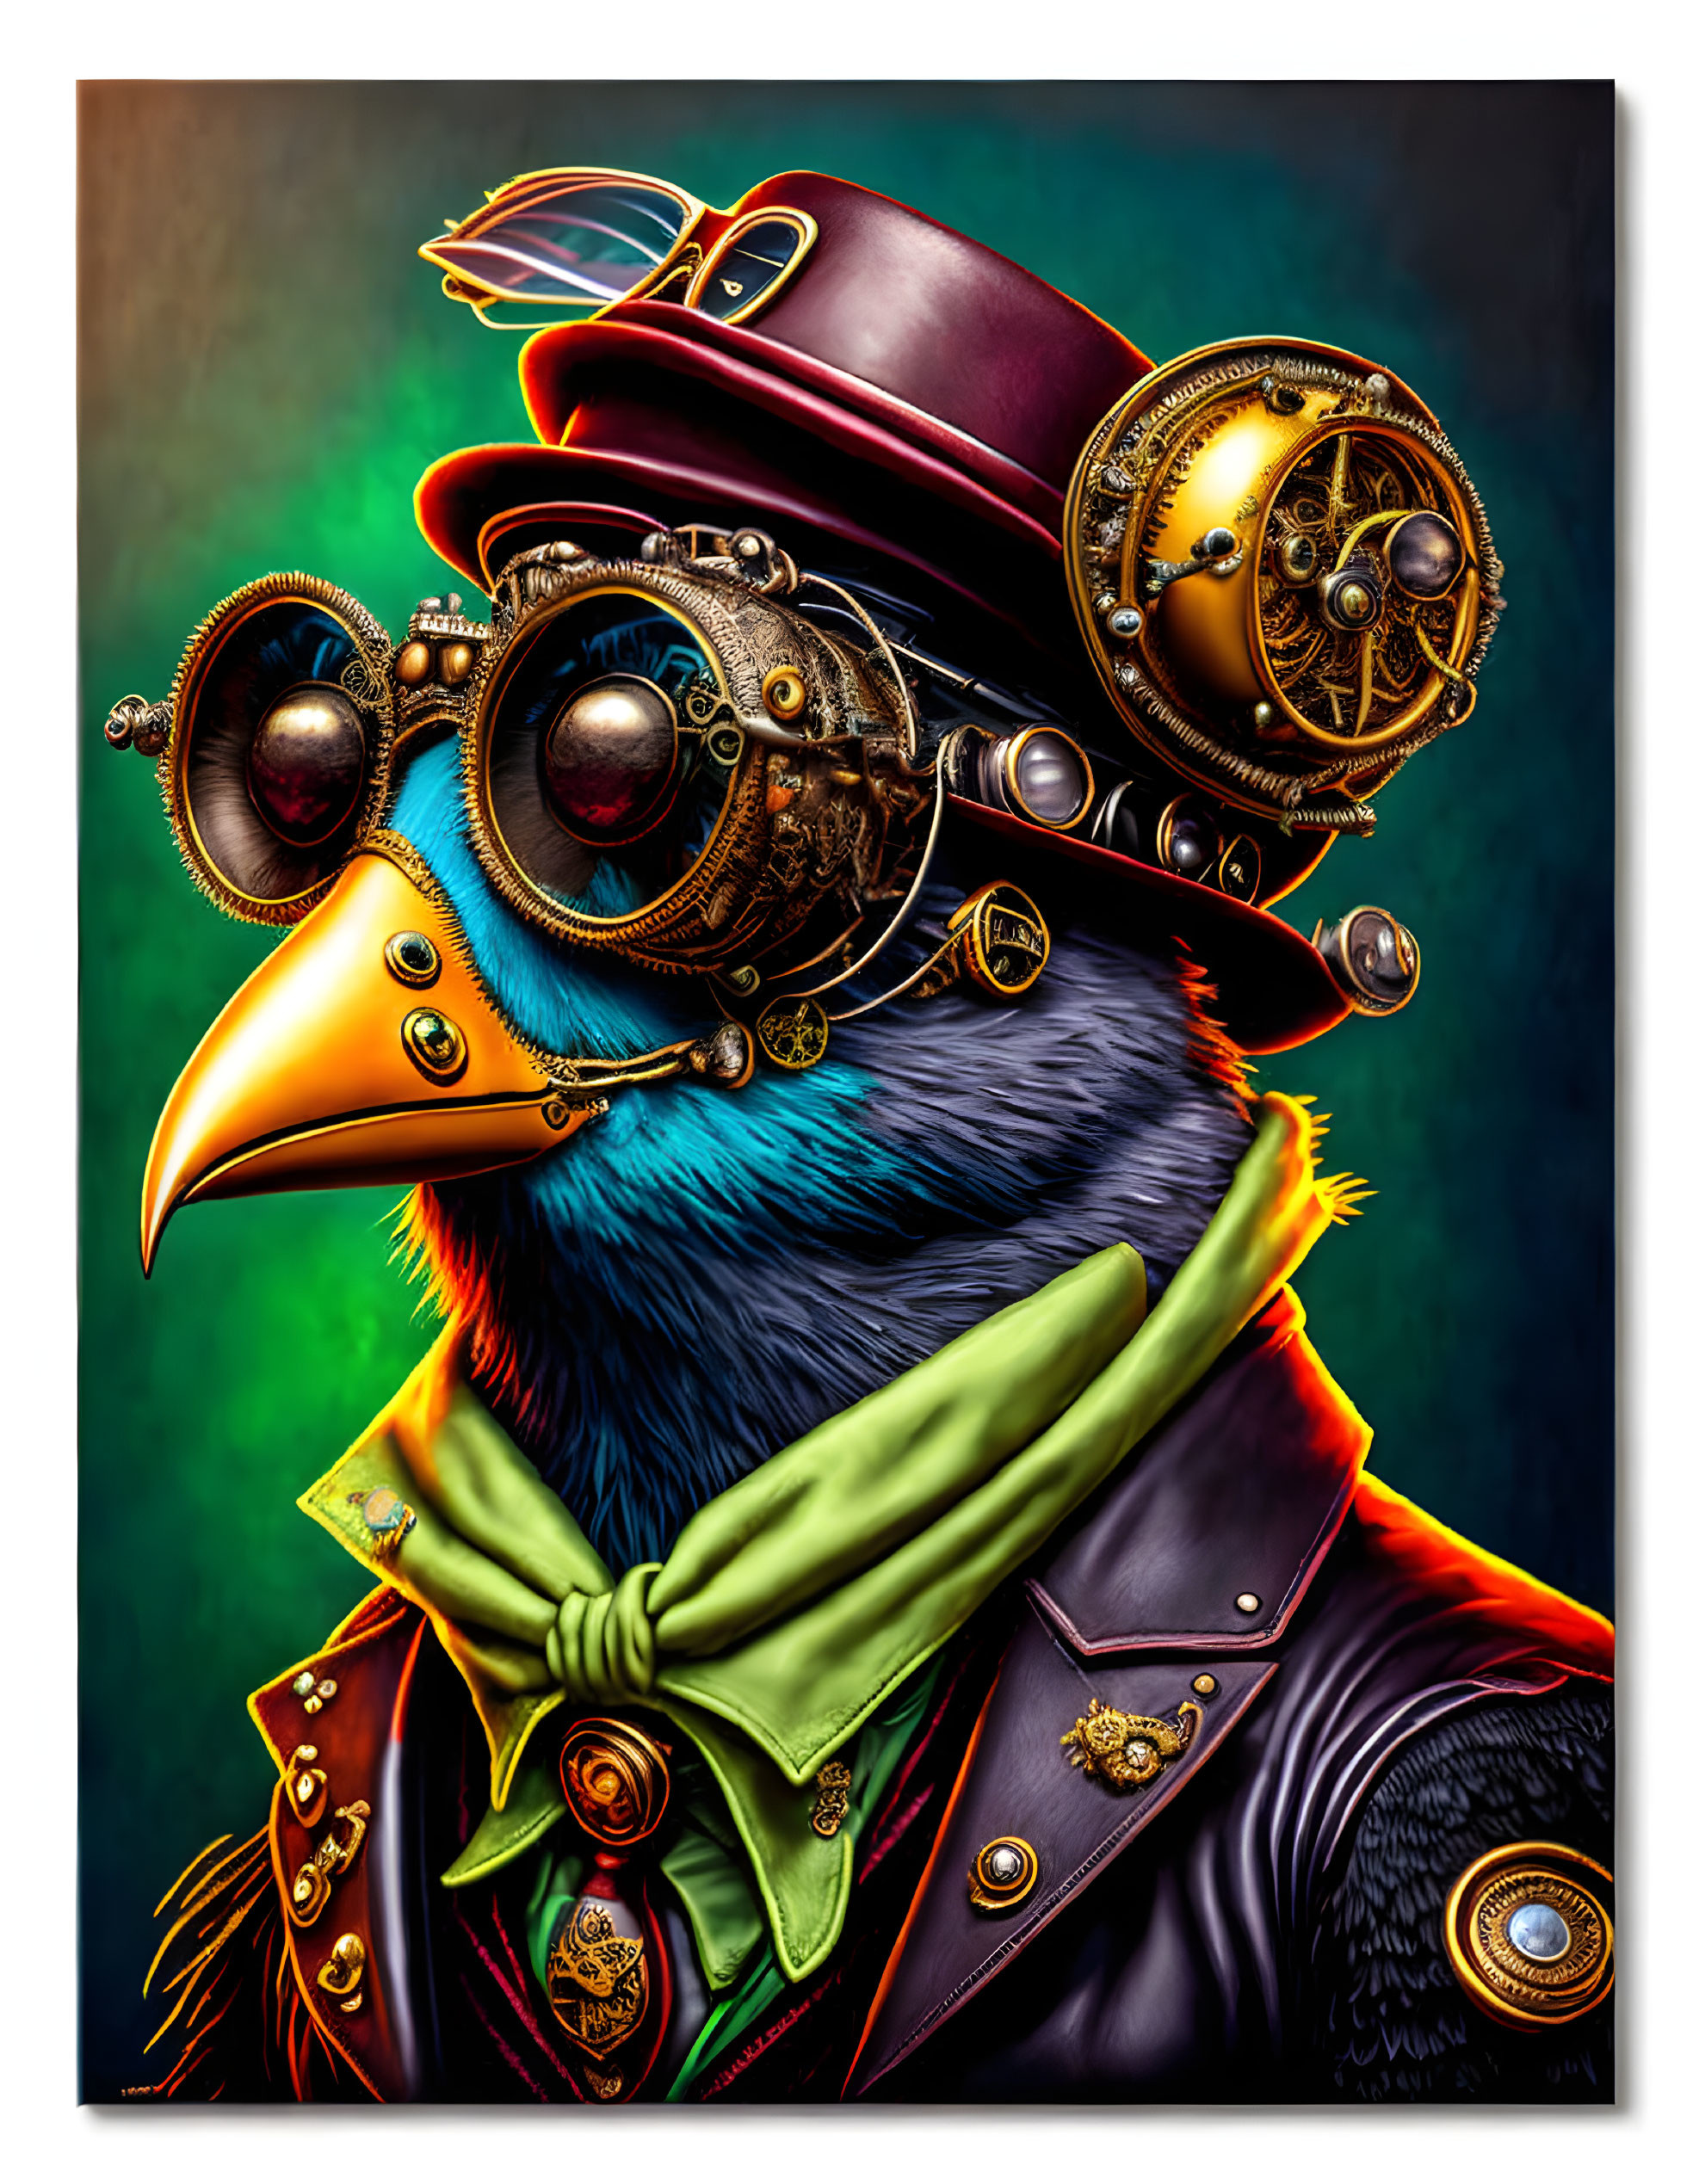 Steampunk Crow with eye glasses